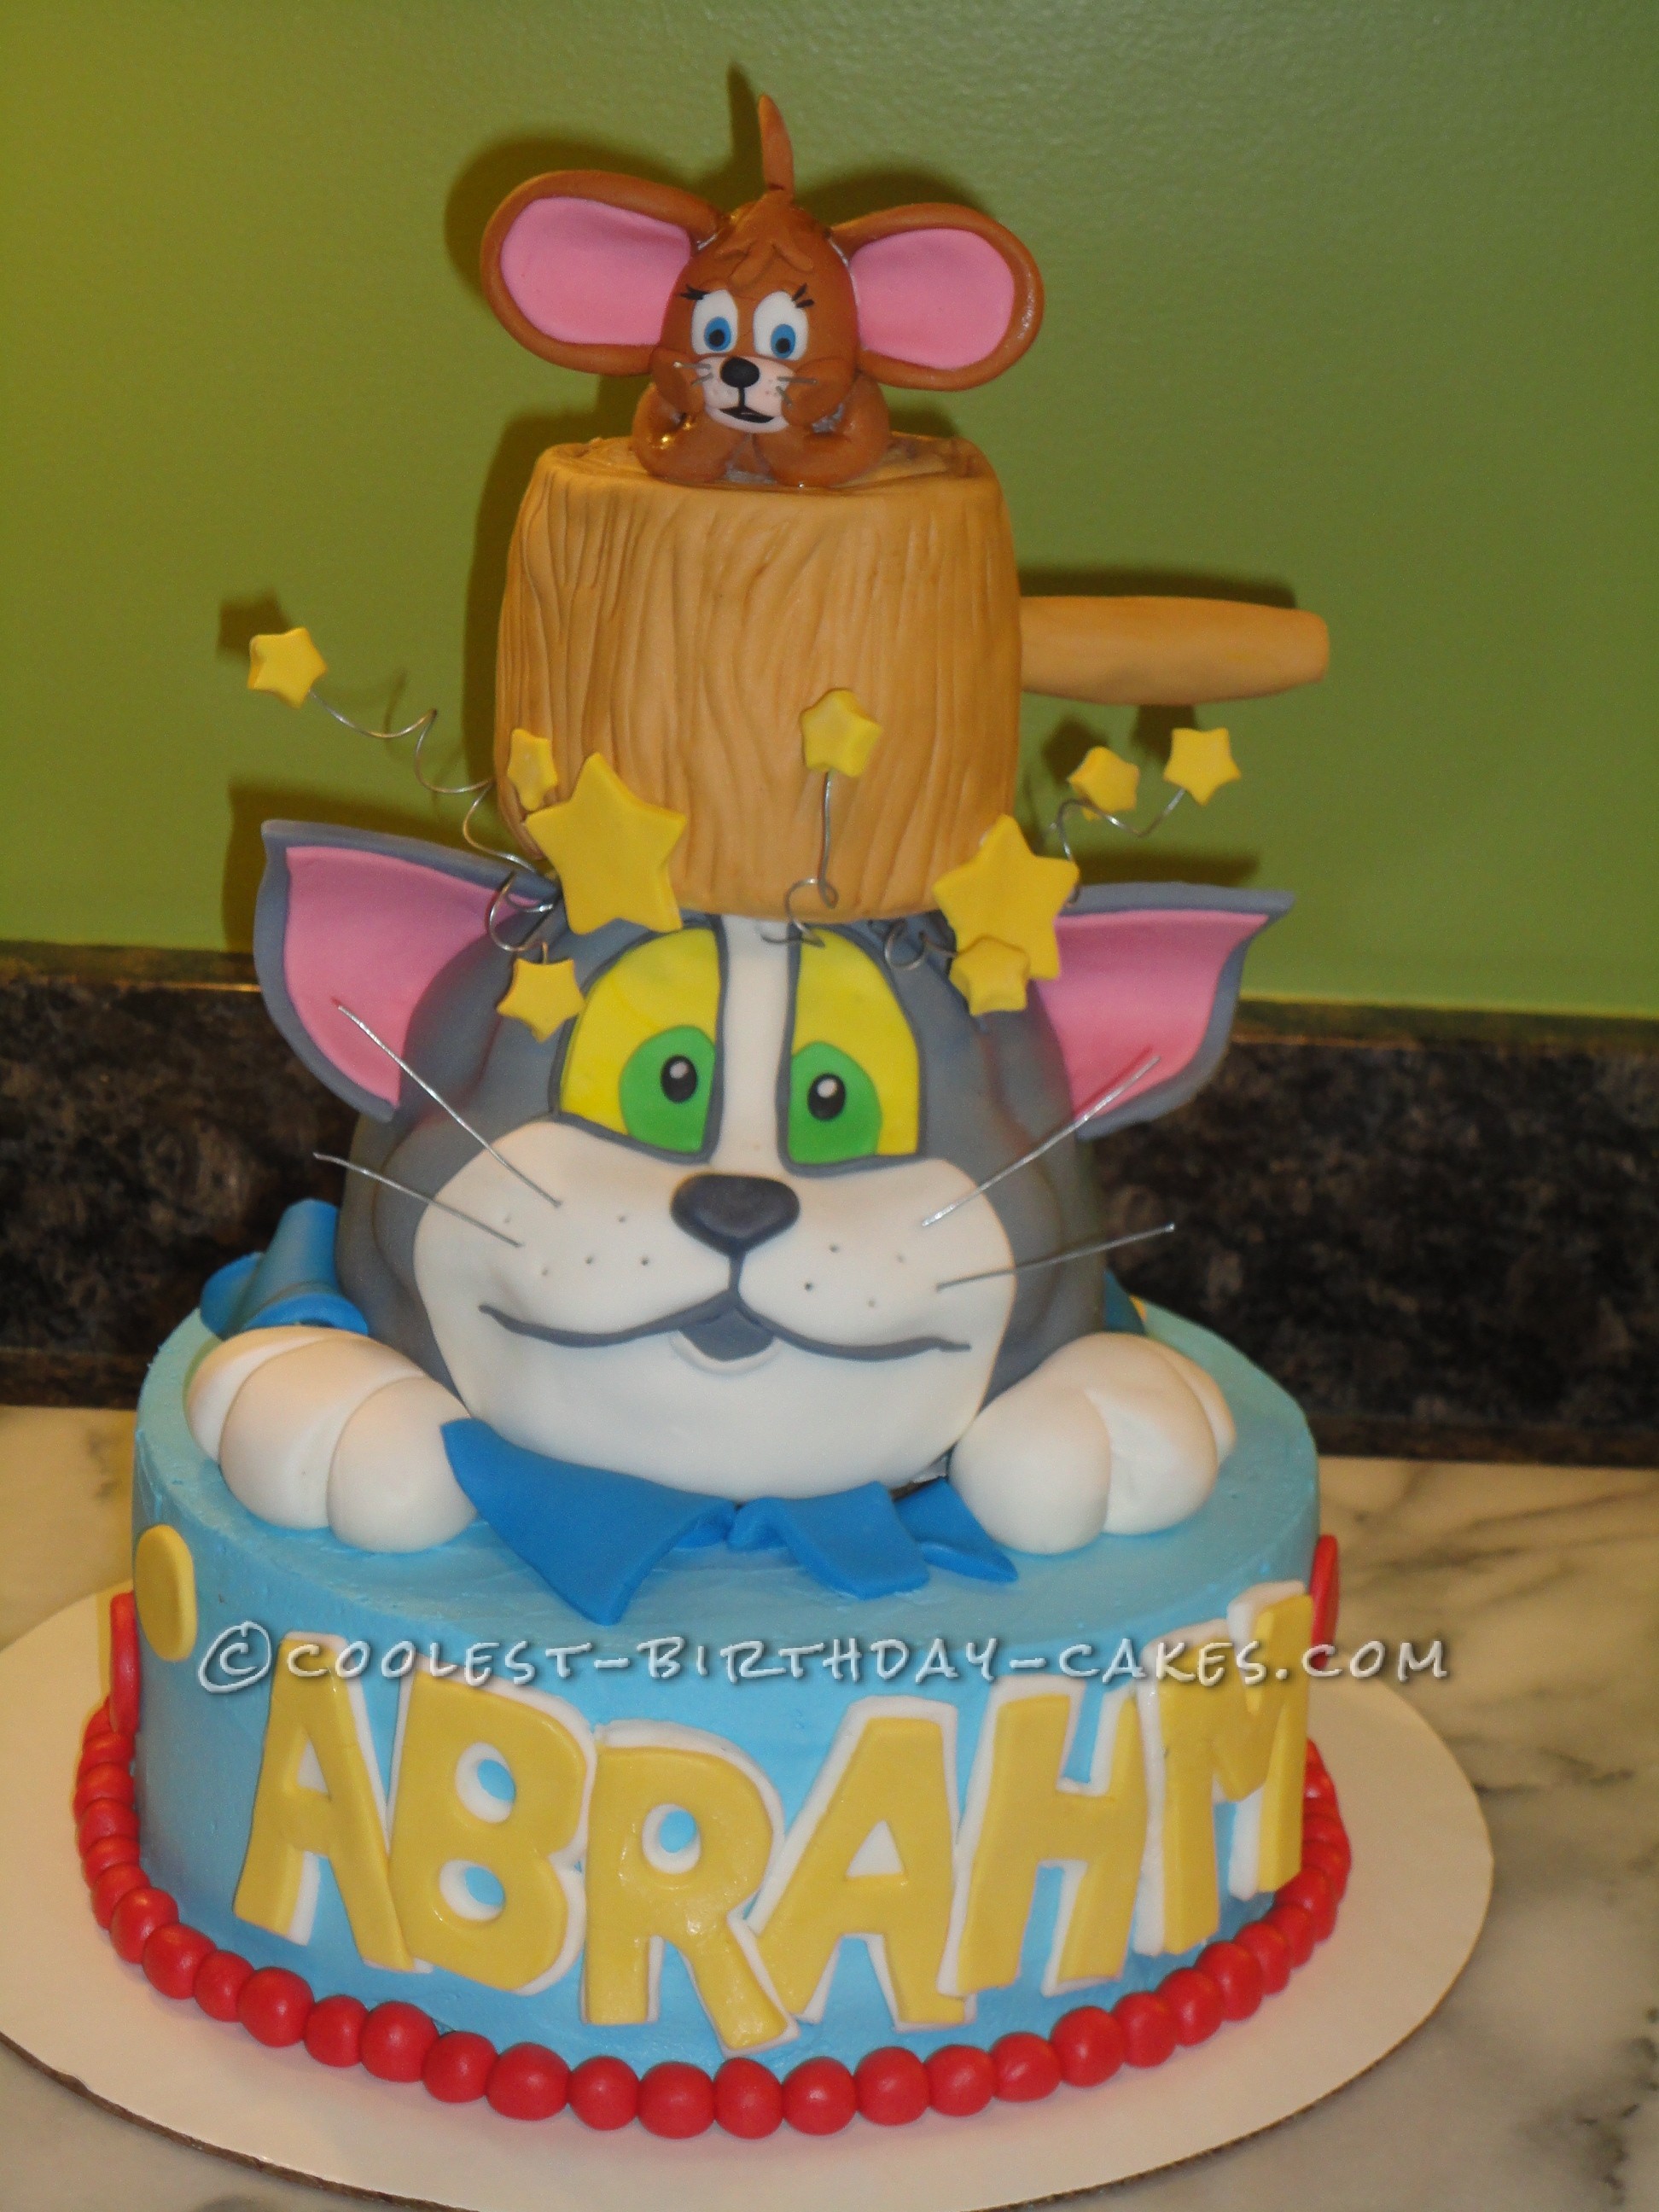 Coolest Tom and Jerry Cake